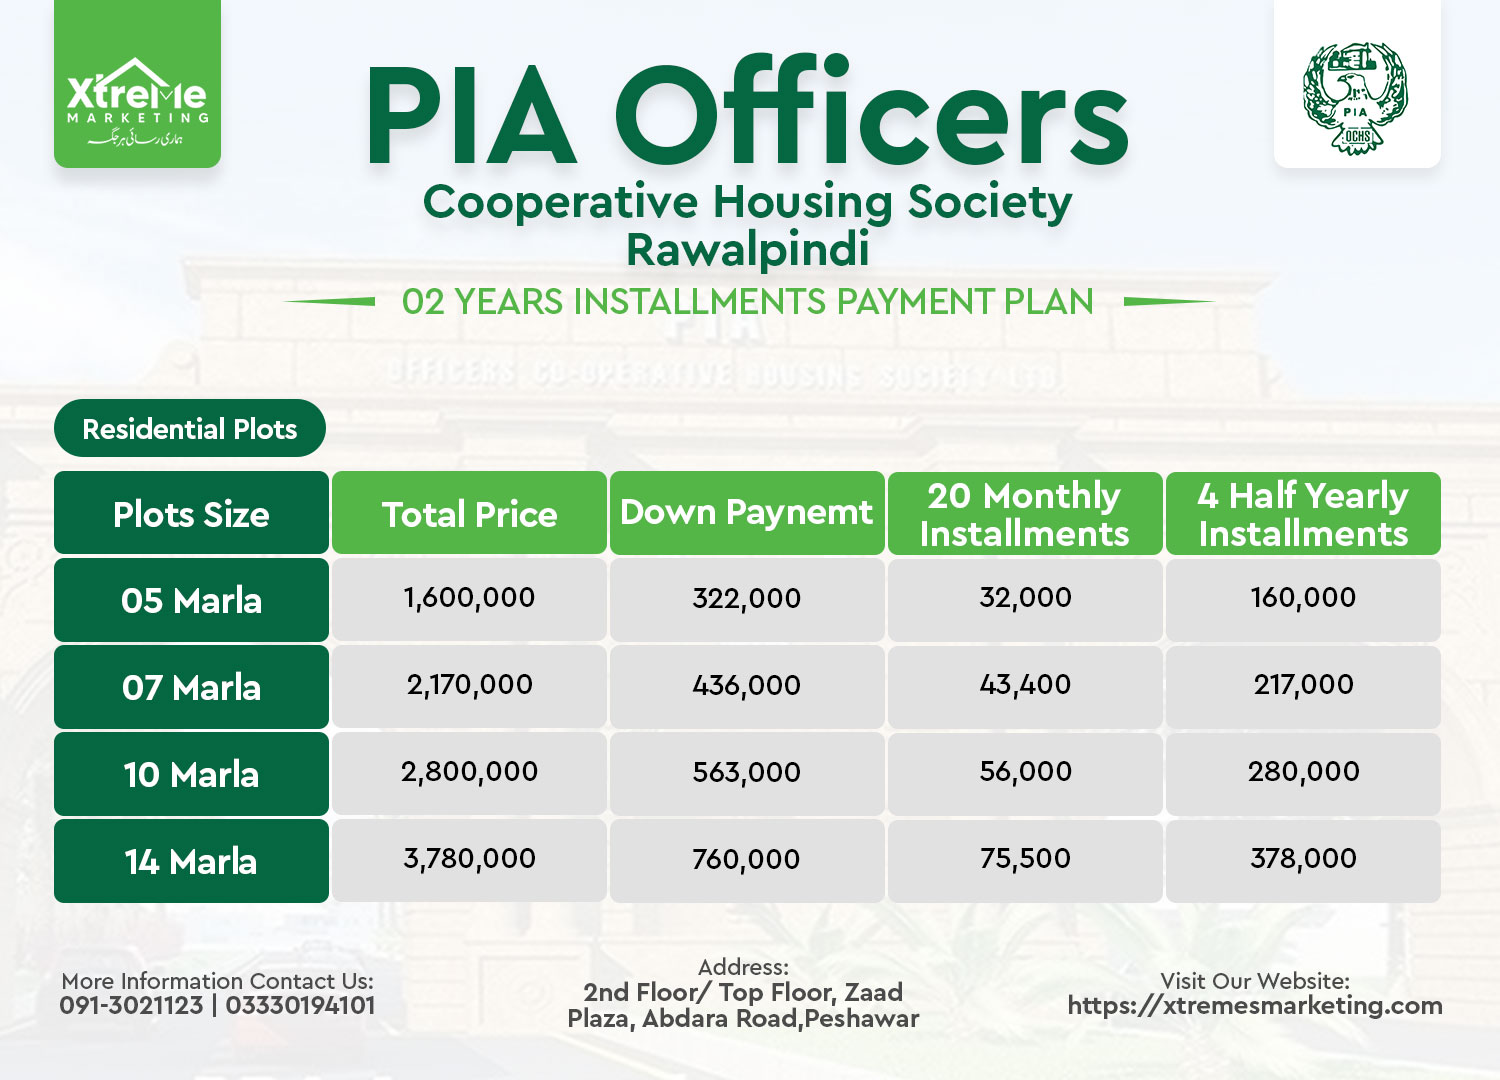 pia-officers-cooperative-housing-society-rawalpindi-PAYMENT-PLAN-RESIDENTIAL-PLOTS